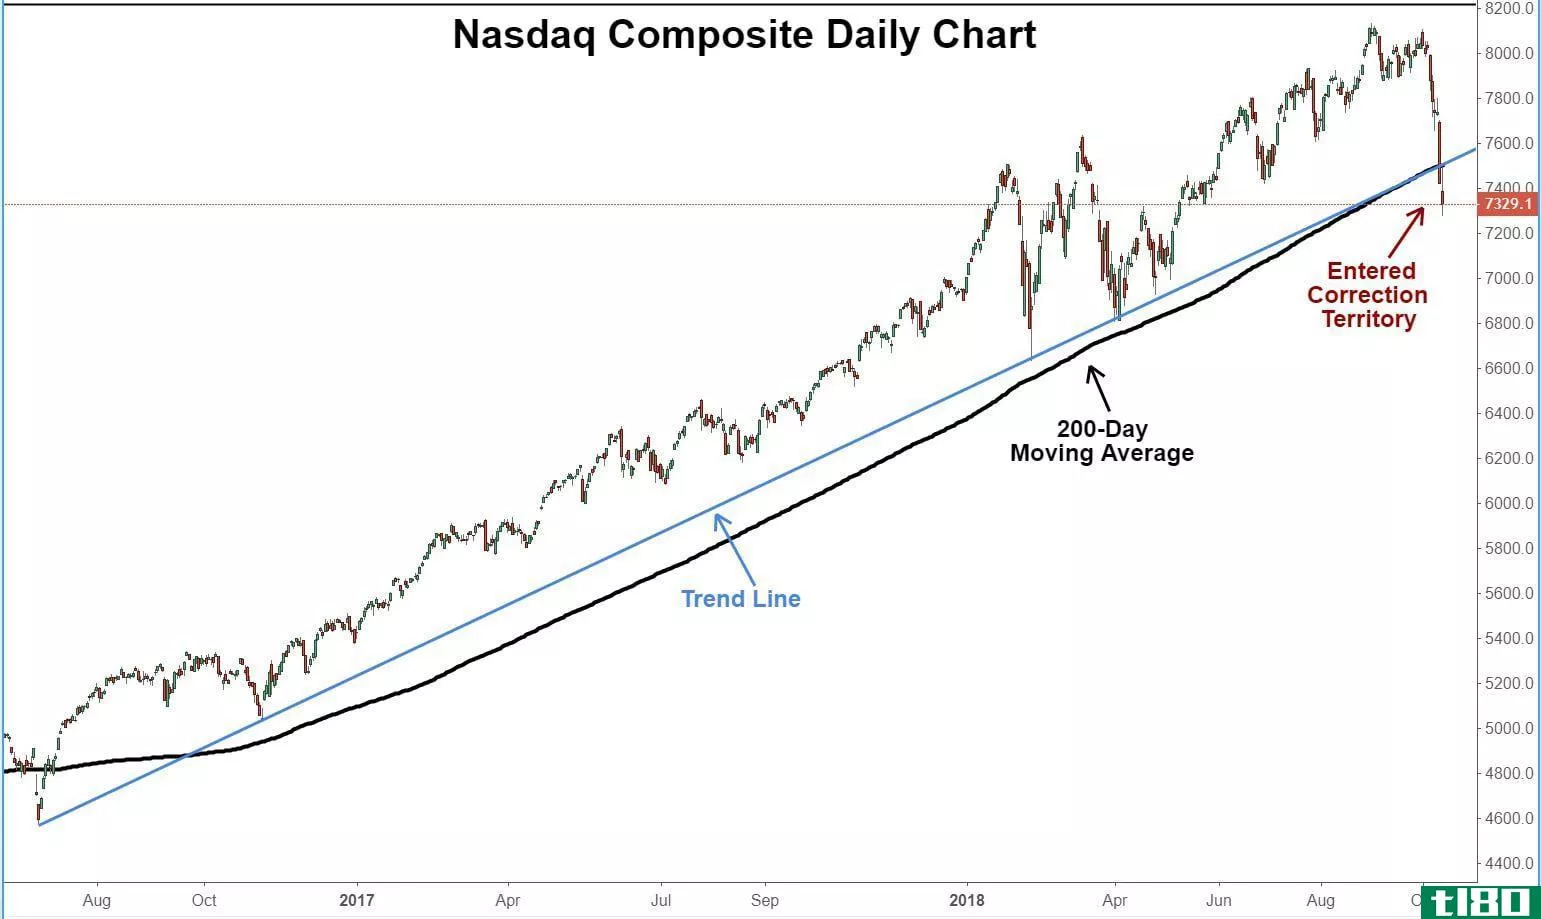 Daily technical chart showing the performance of the Nasdaq Composite Index